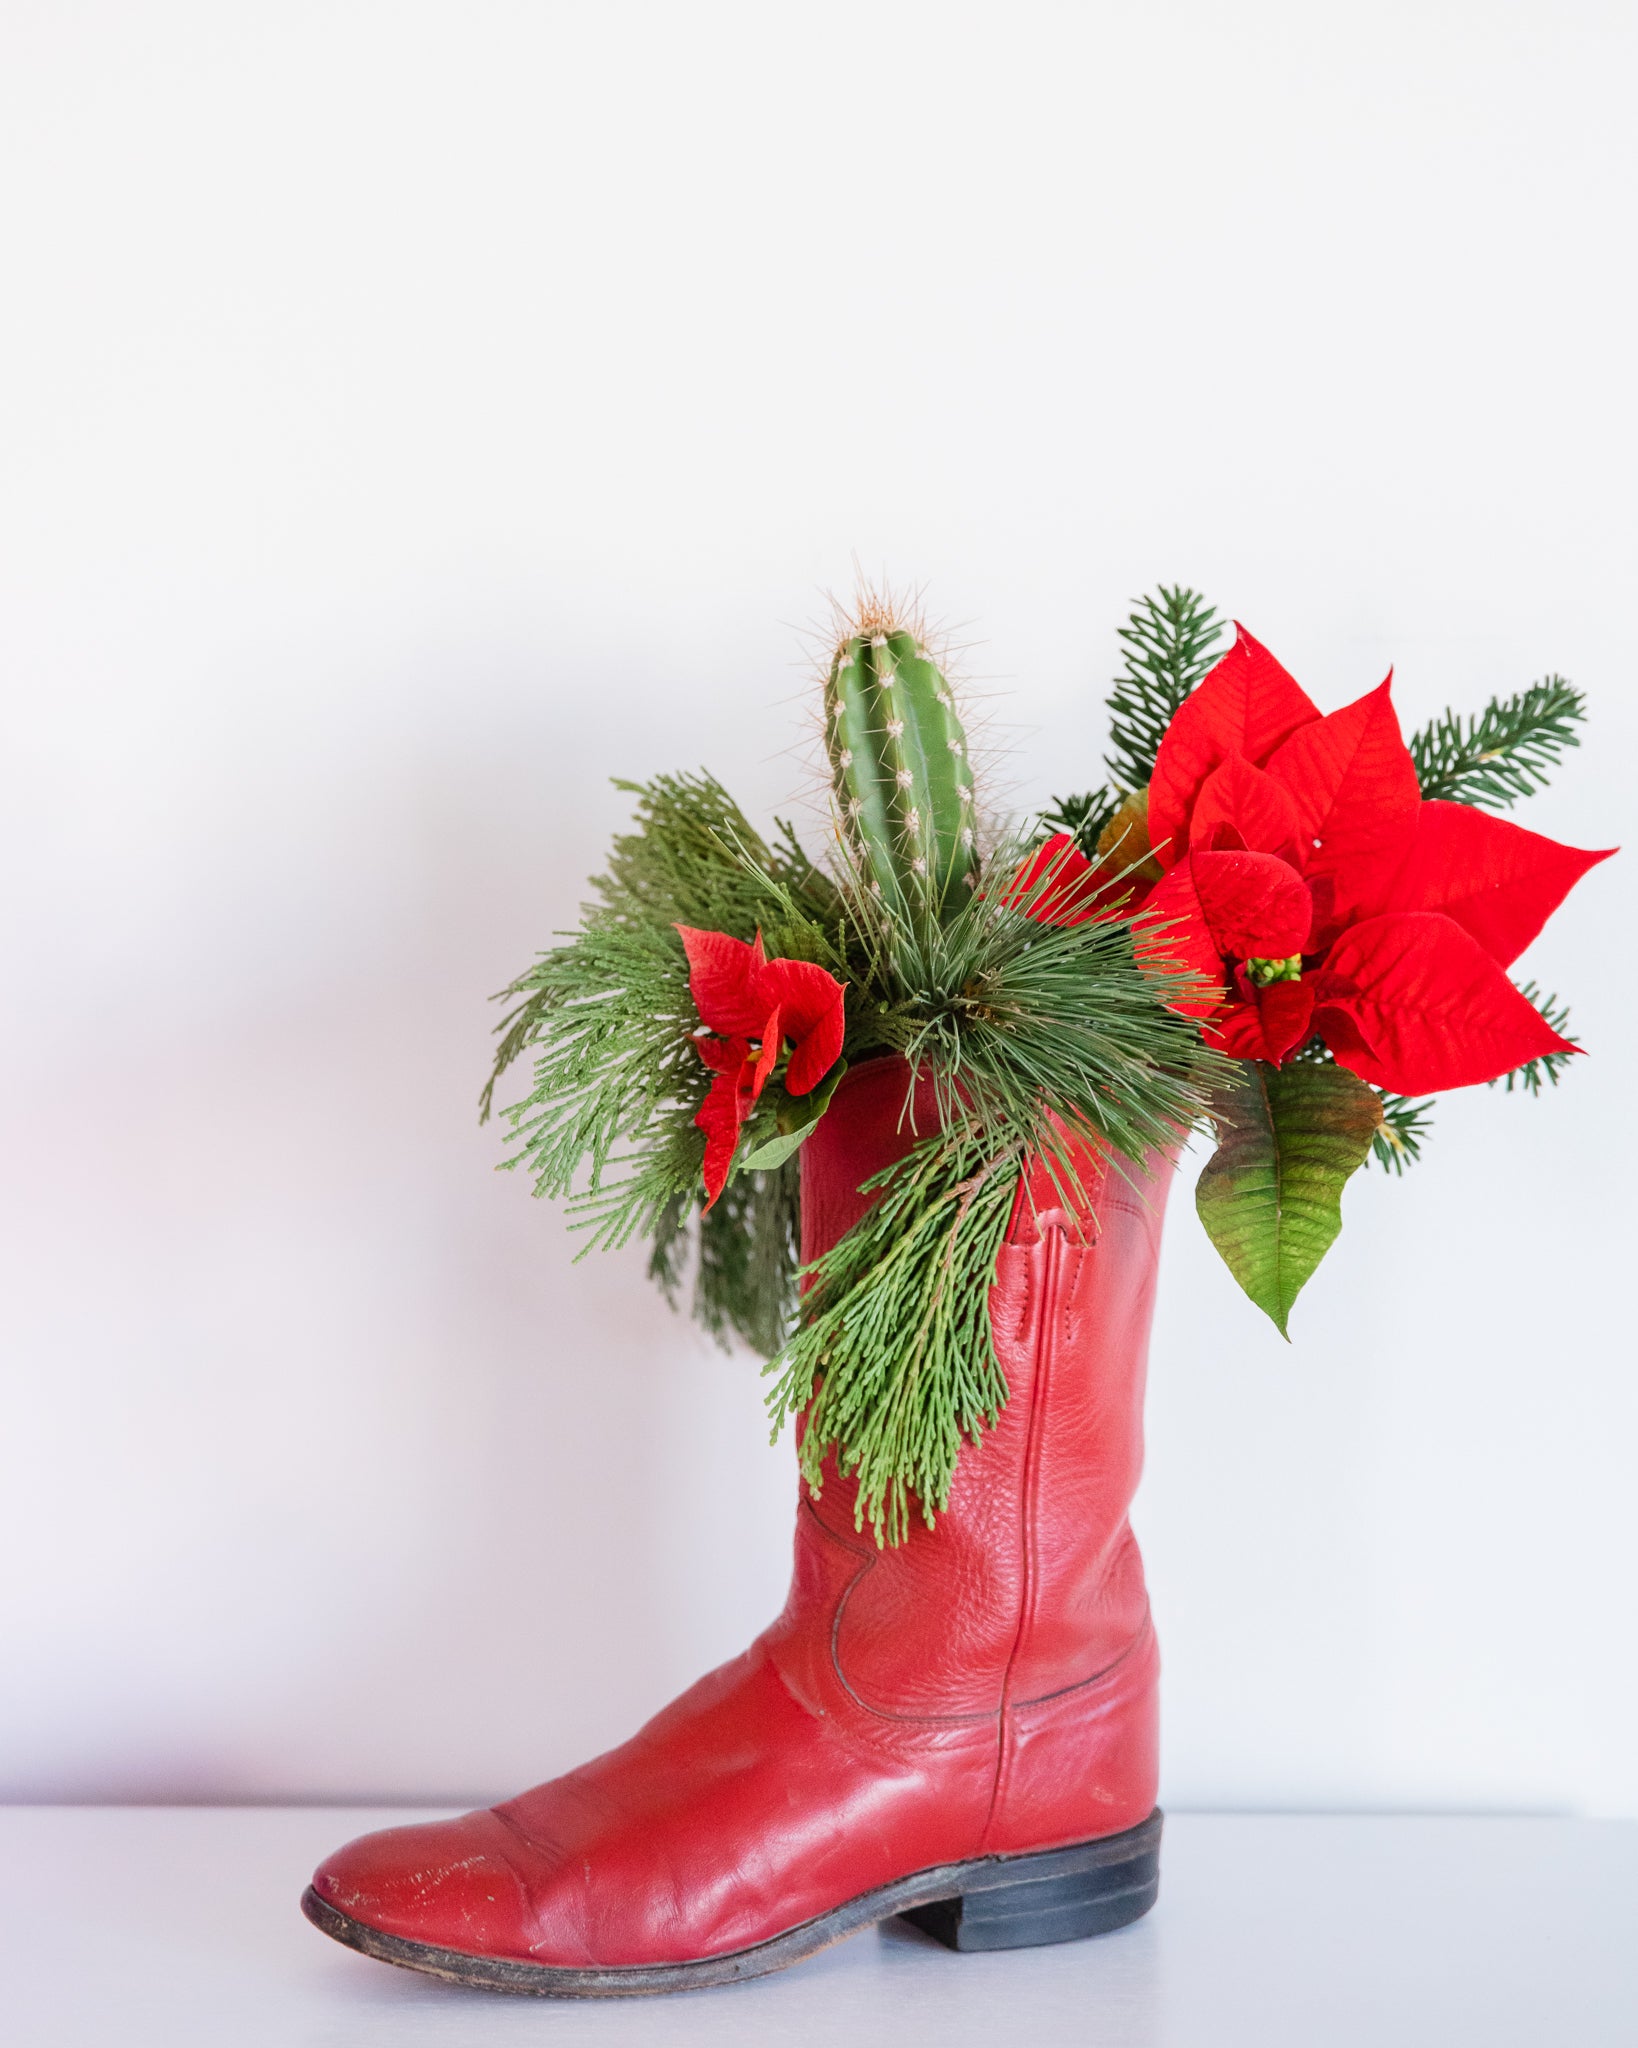 Cowboy boot used as a vase for a floral Christmas centerpiece.